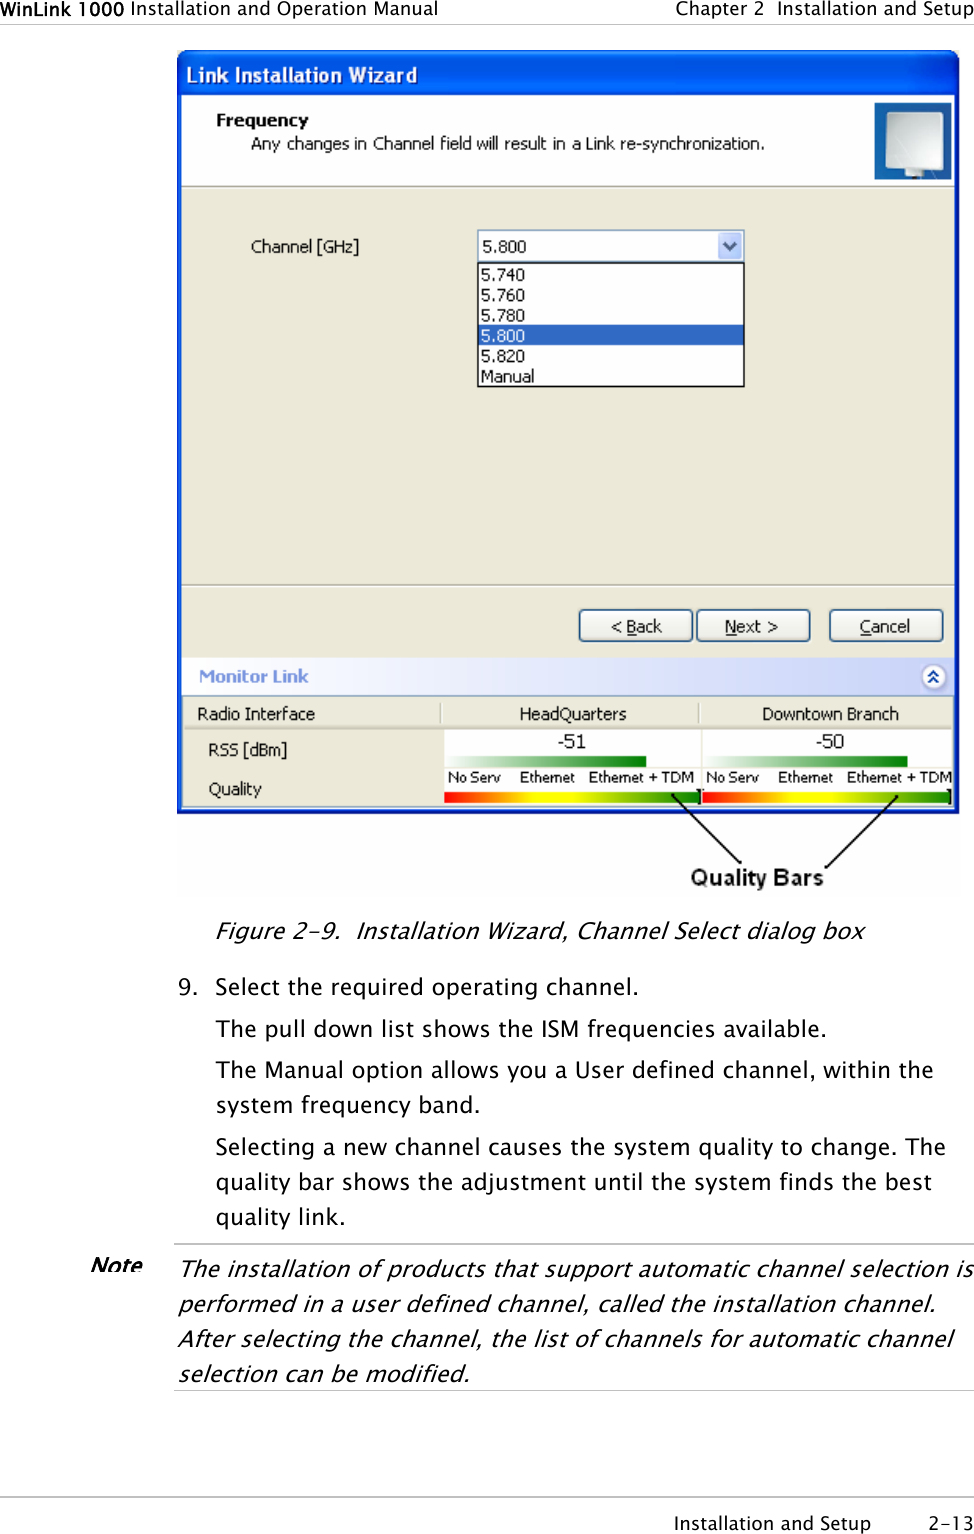 WinLink 1000 Installation and Operation Manual  Chapter 2  Installation and Setup  Installation and Setup  2-13  Figure 2-9.  Installation Wizard, Channel Select dialog box 9. Select the required operating channel. The pull down list shows the ISM frequencies available. The Manual option allows you a User defined channel, within the system frequency band. Selecting a new channel causes the system quality to change. The quality bar shows the adjustment until the system finds the best quality link.  The installation of products that support automatic channel selection is performed in a user defined channel, called the installation channel. After selecting the channel, the list of channels for automatic channel selection can be modified.   Note